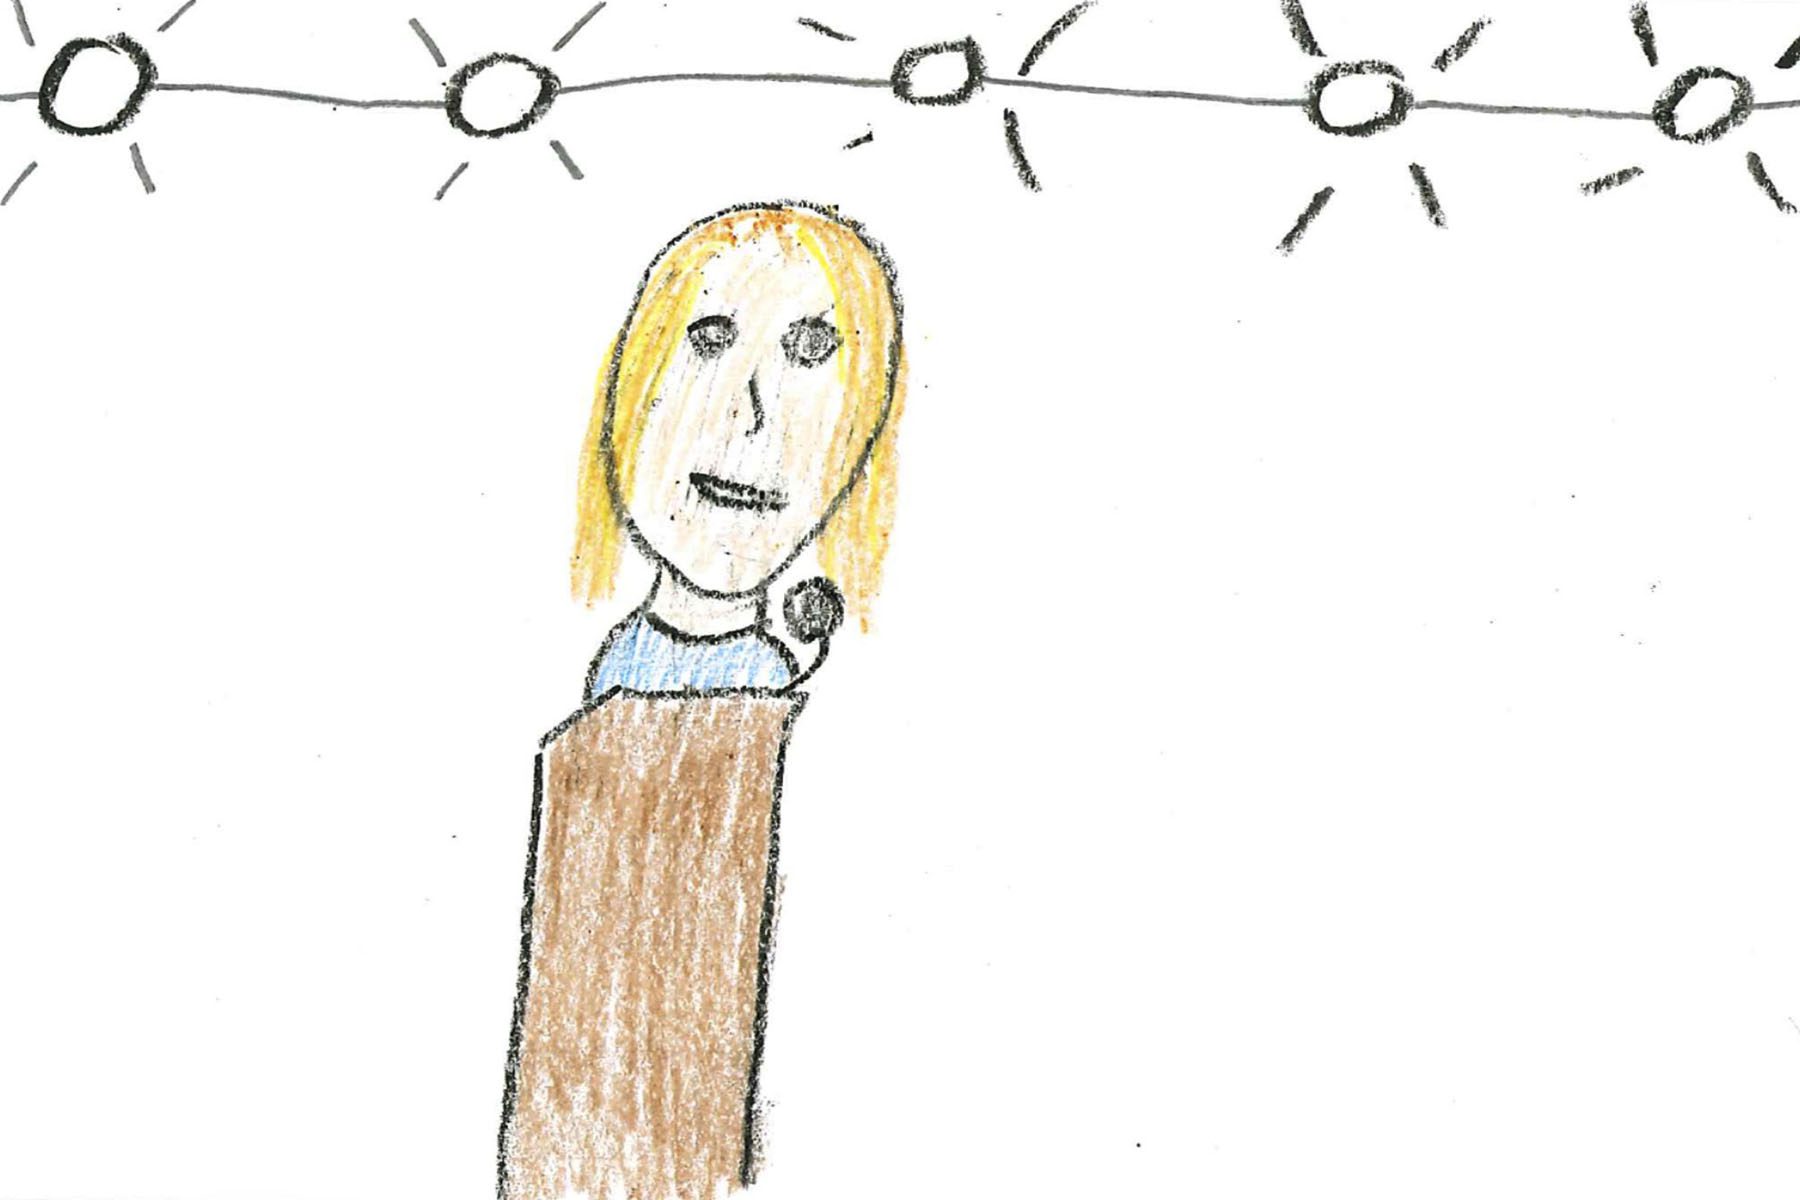 A child's drawing is pictured. The child drew what appears to be a blond woman wearing a blue shirt giving a speech at a podium. There are spotlights above her.